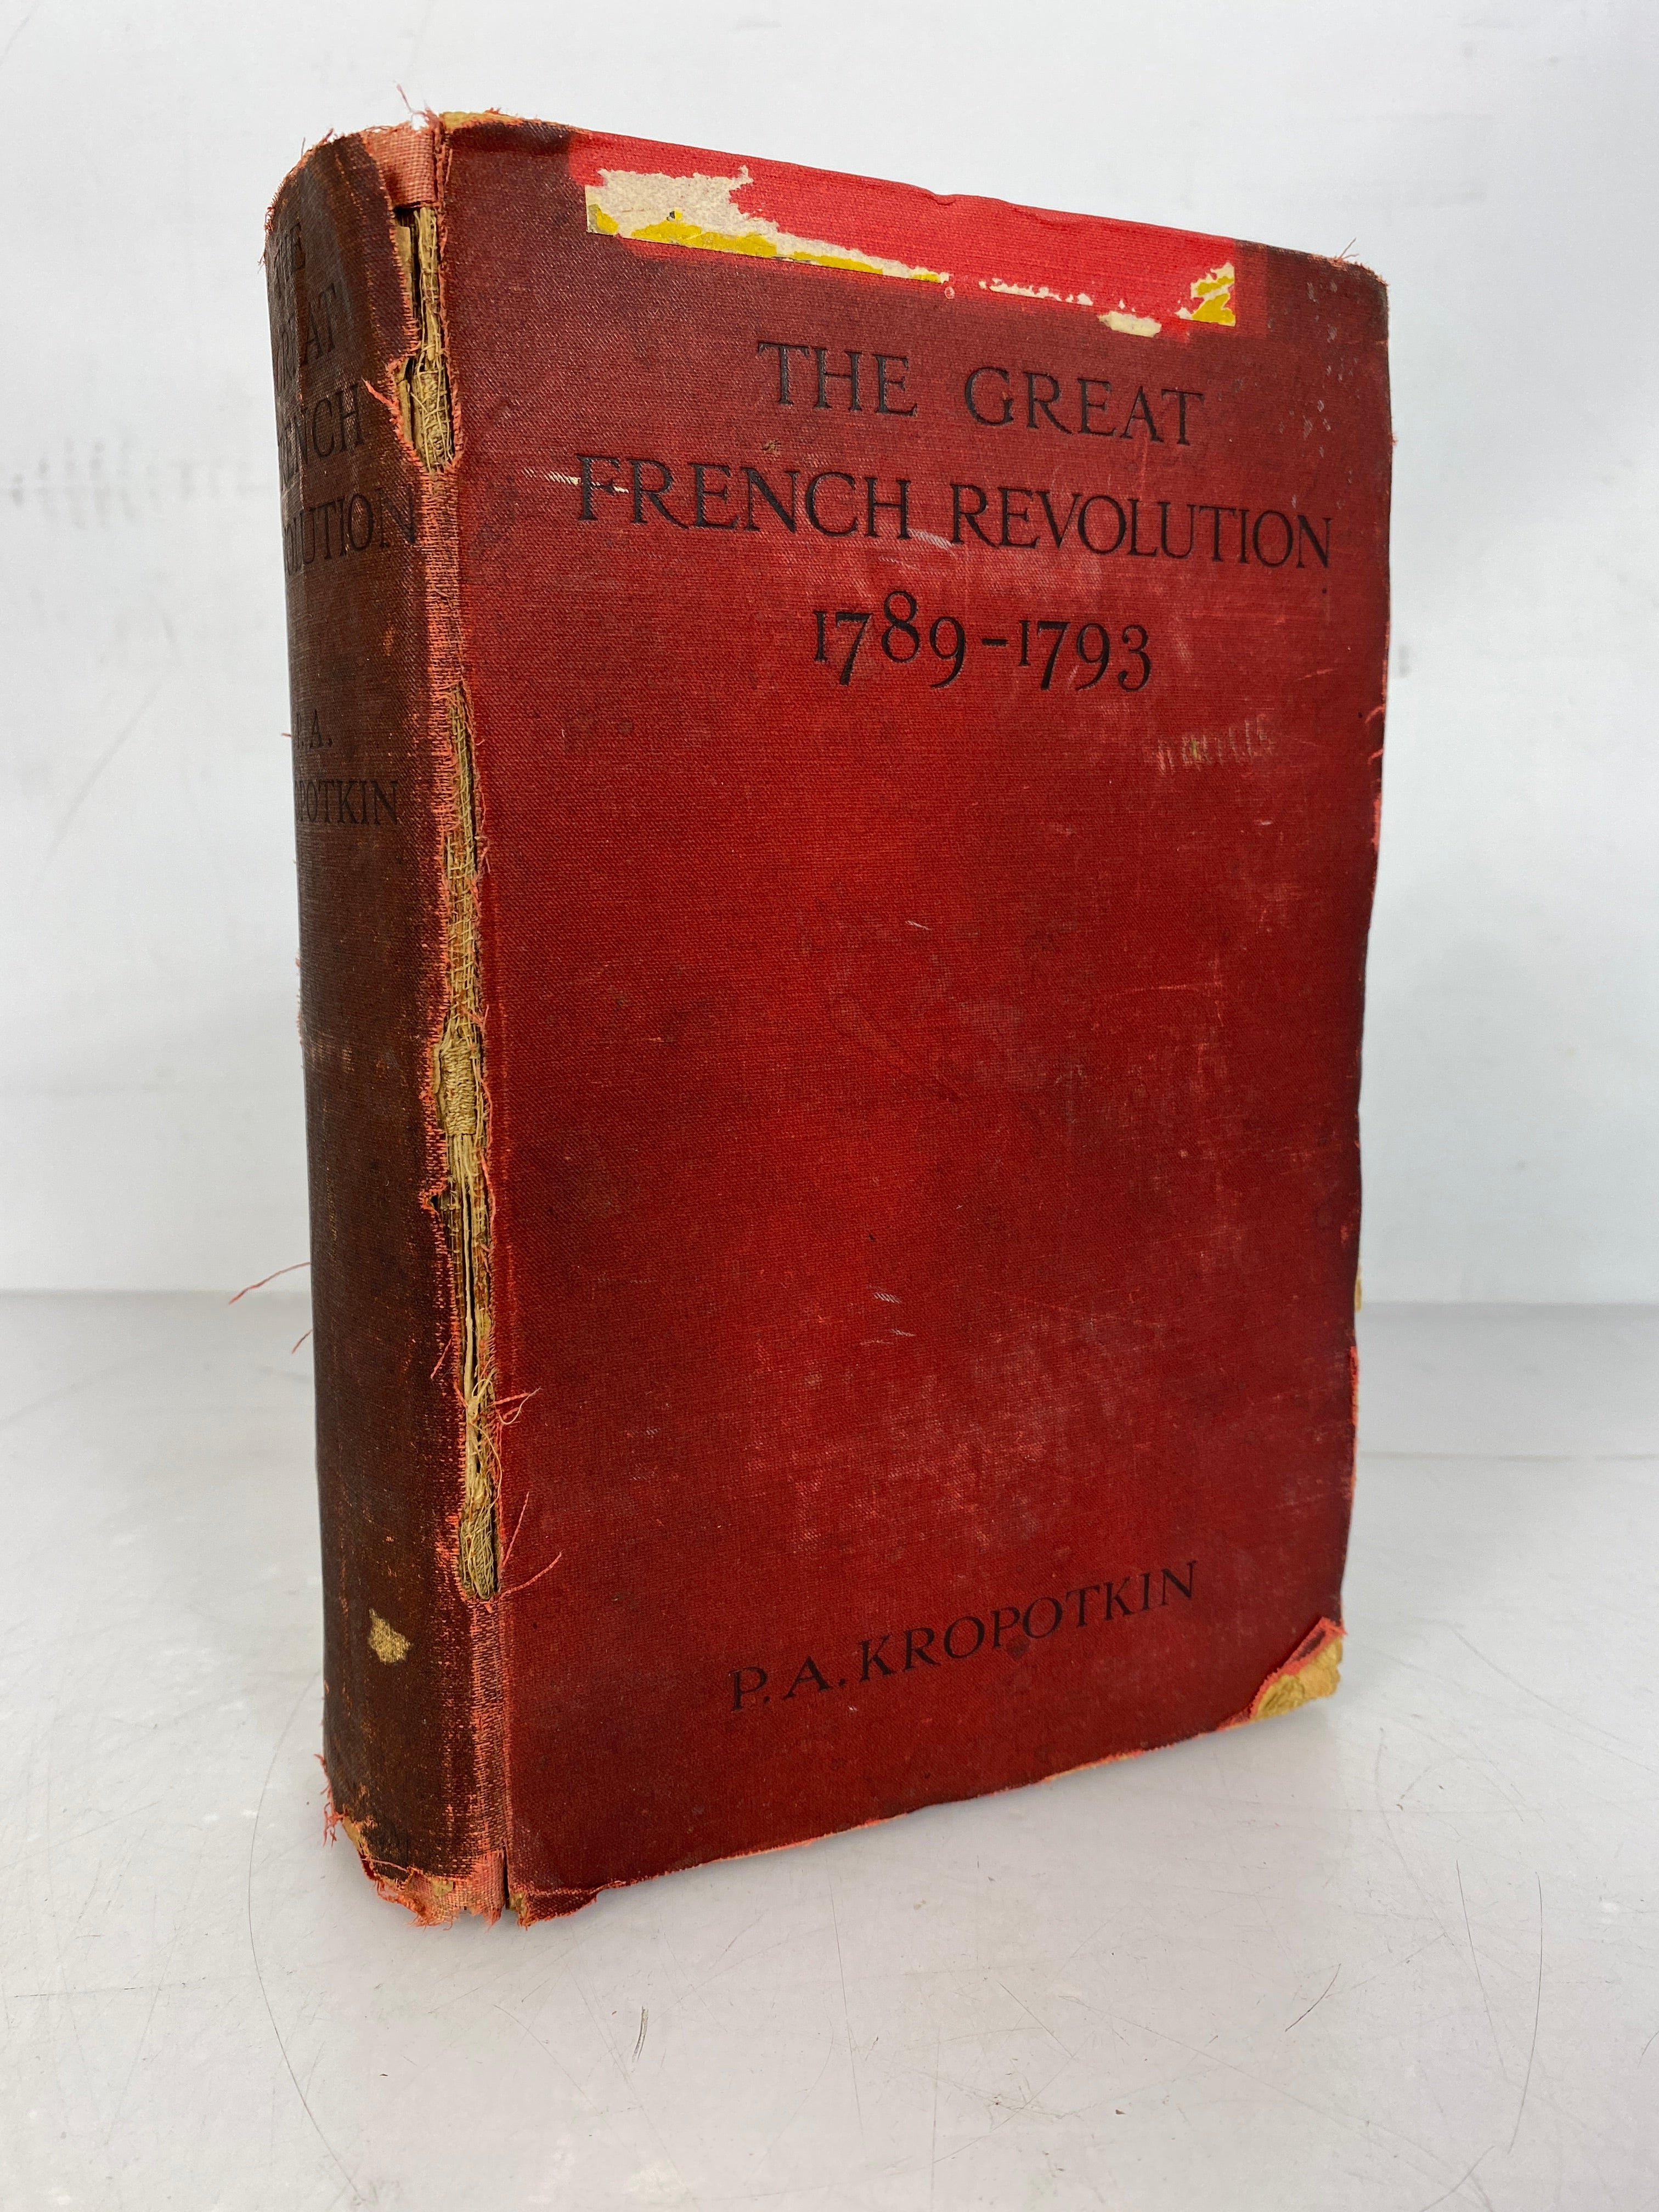 The Great French Revolution 1789-1793 by P.A. Kropotkin 1909 HC